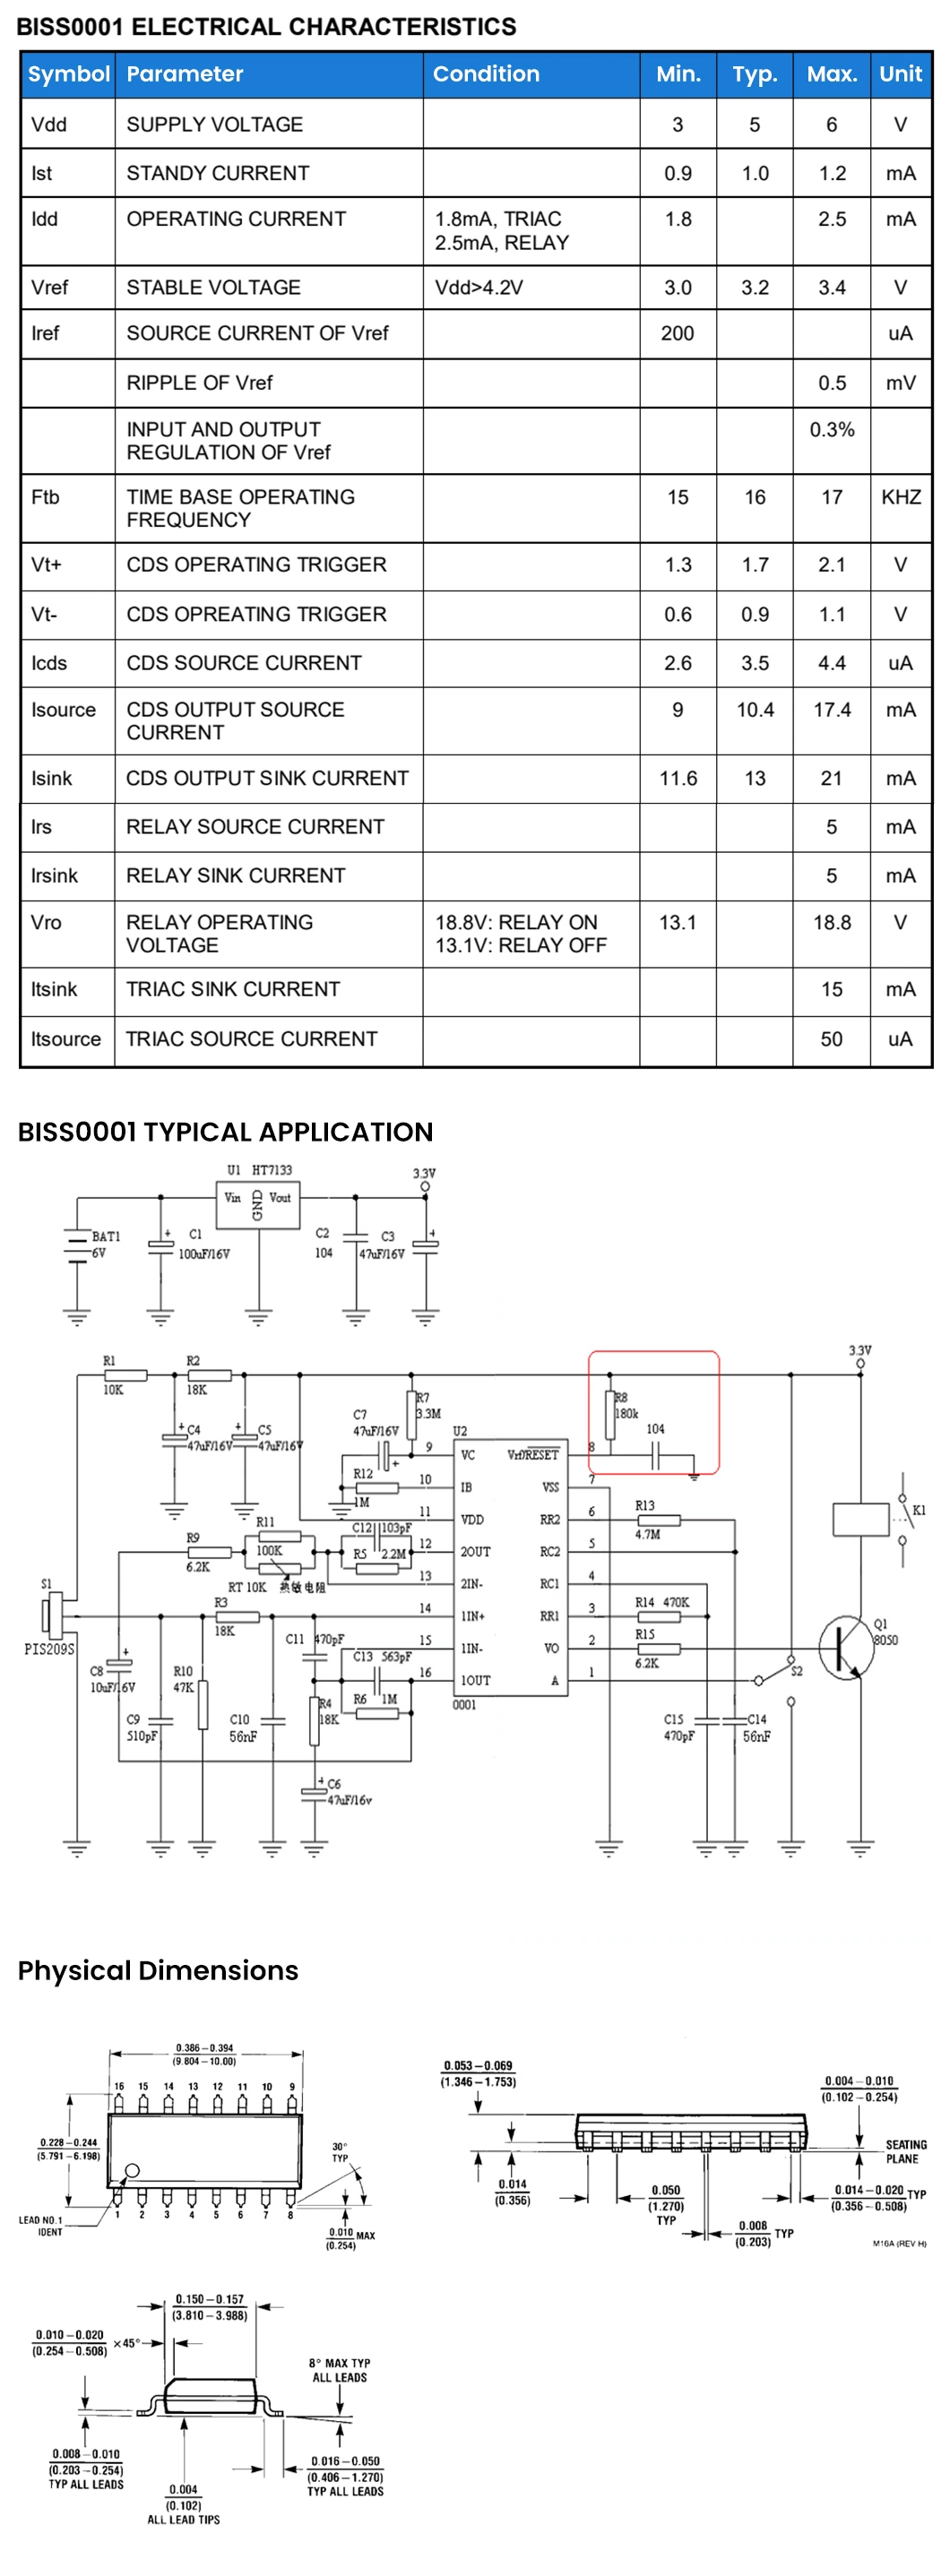 Haiwang IC Chip Electronic Components Biss0001 China Built-in Delay Time Timer Sensor Signal Processing Integrated Circuit Passive Pyroelectric Infrared Switch